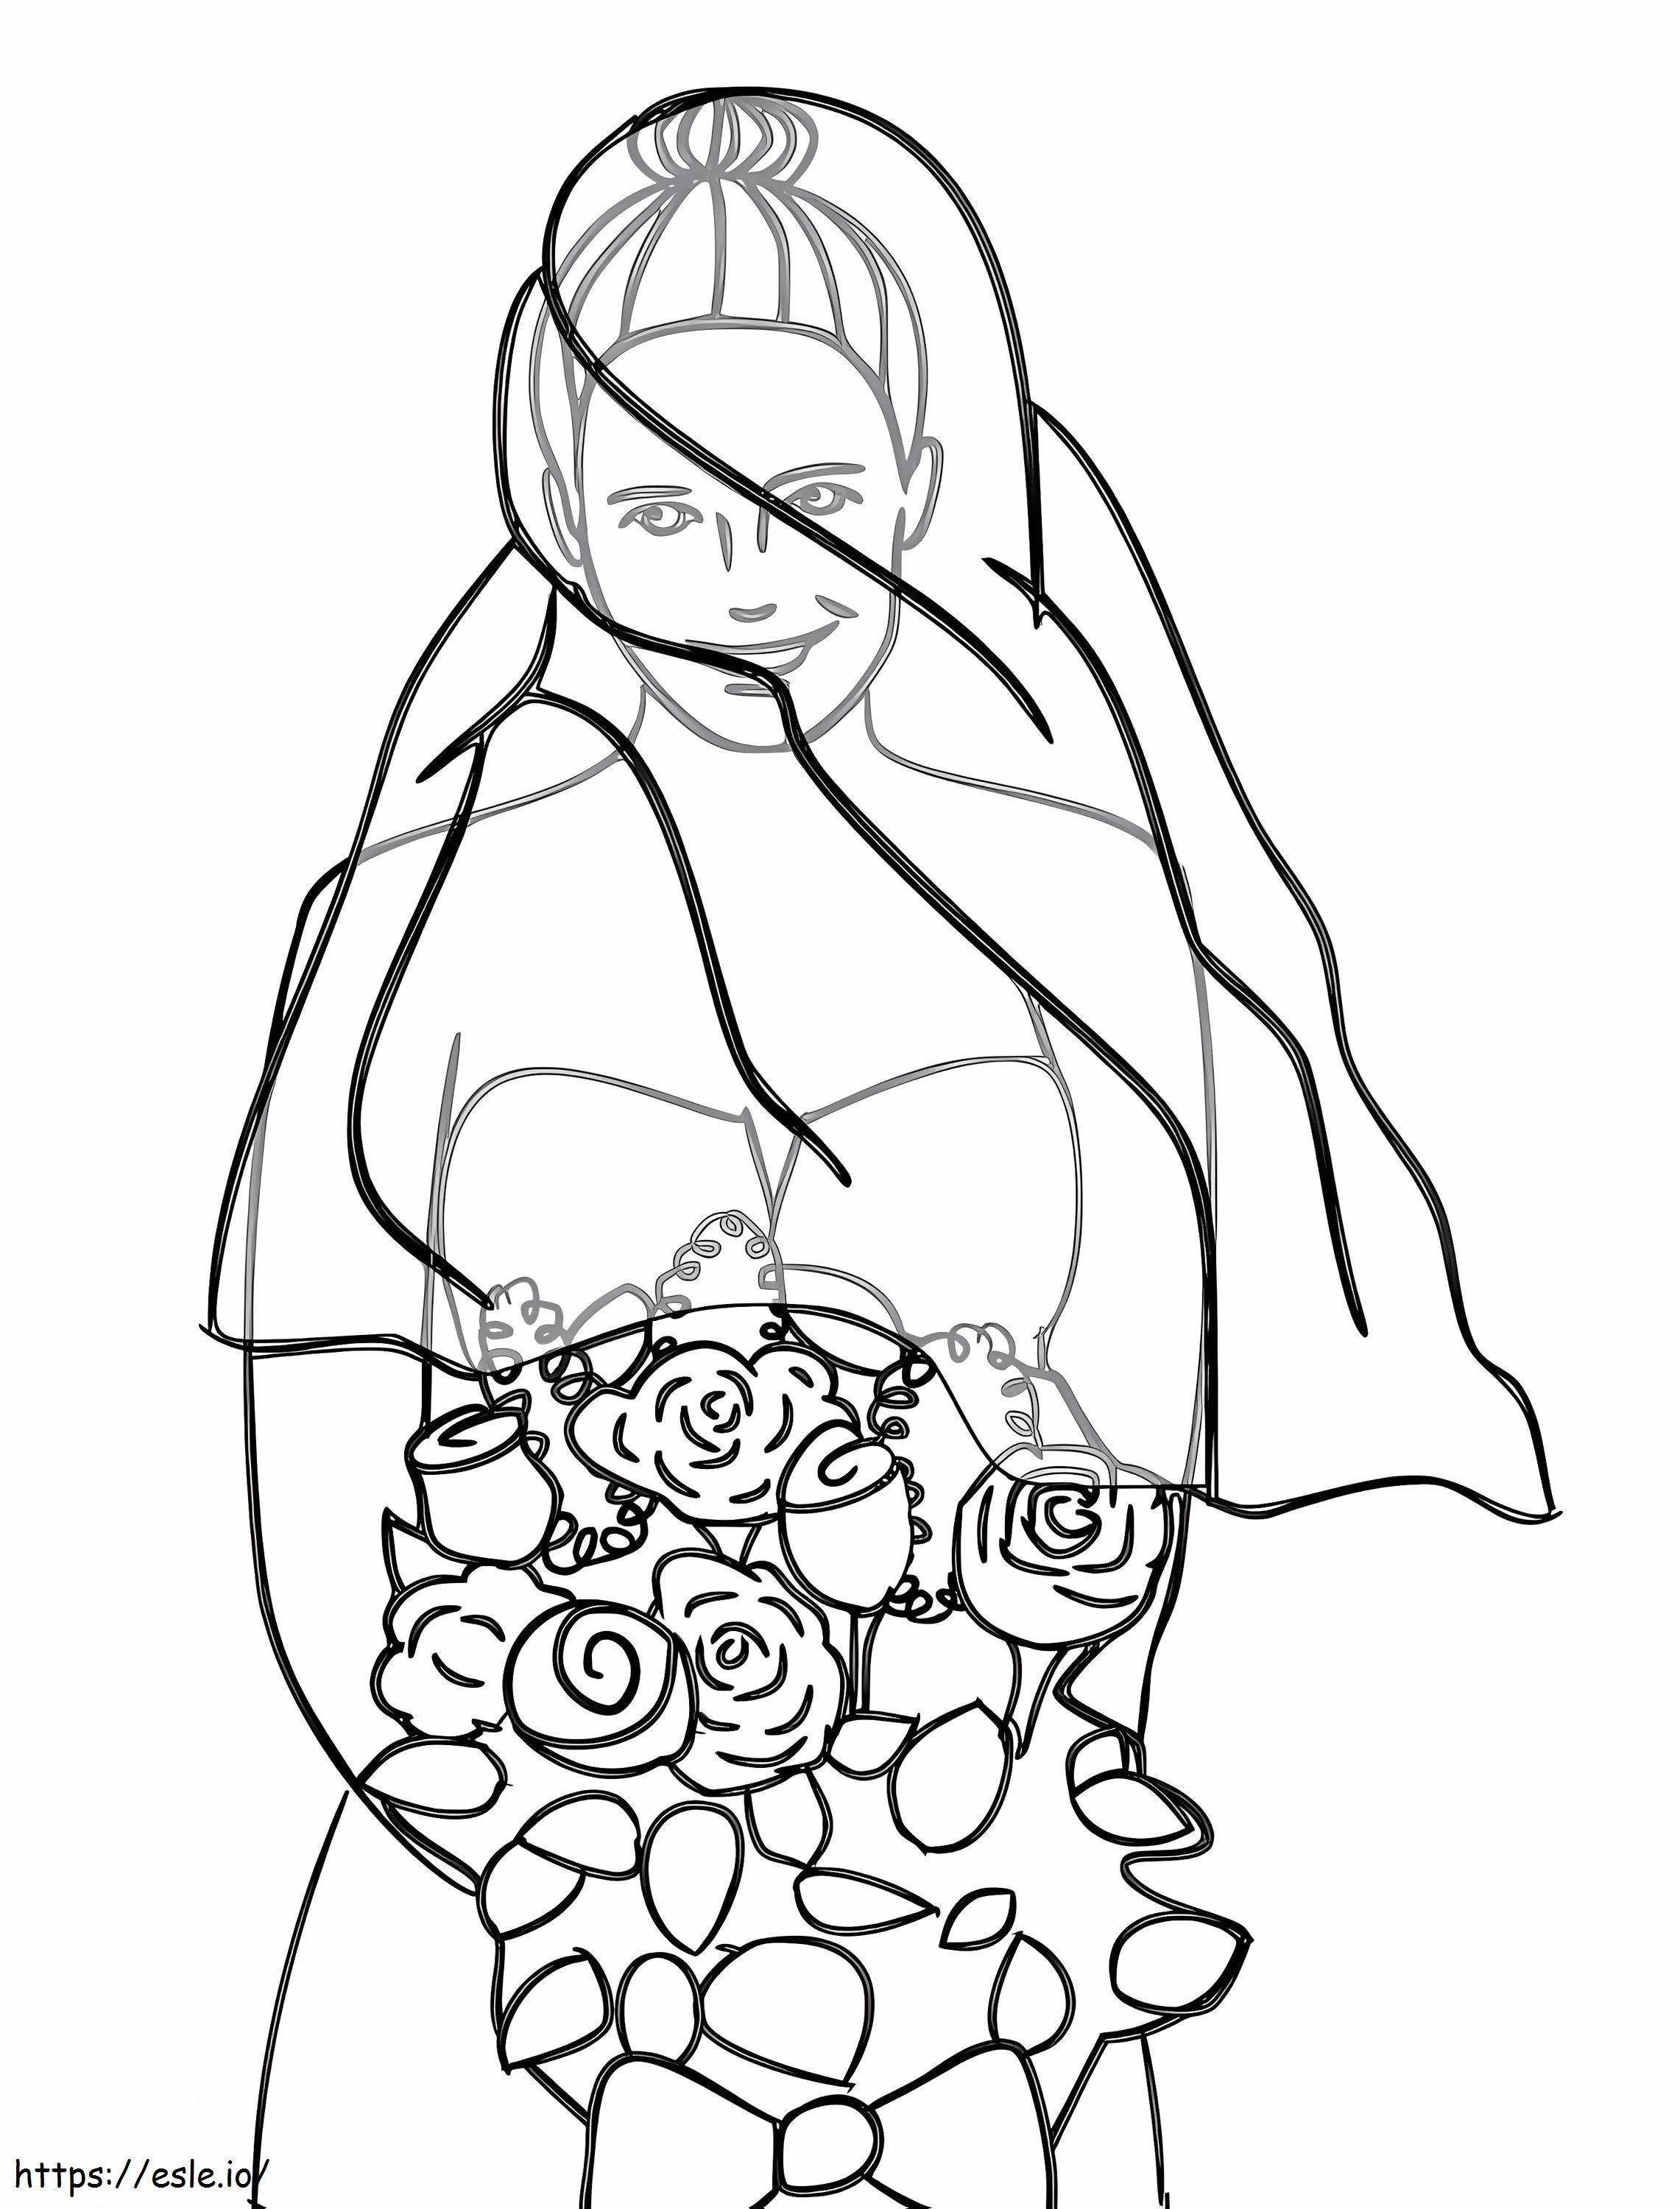 Bride With Wedding Bouquet coloring page